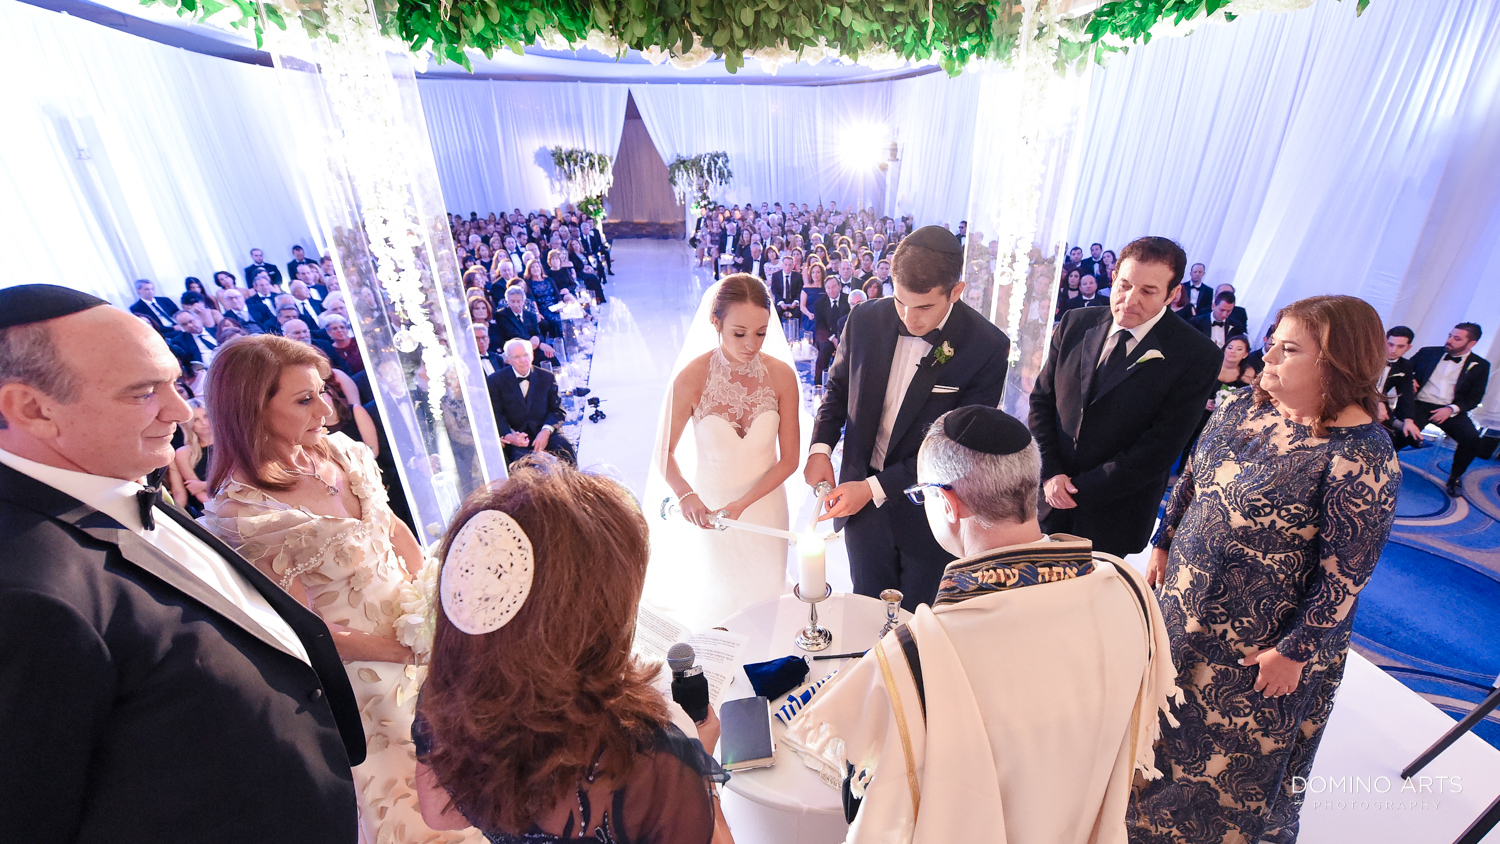 Most beautiful jewish wedding ceremony pictures at fontainebleau miami